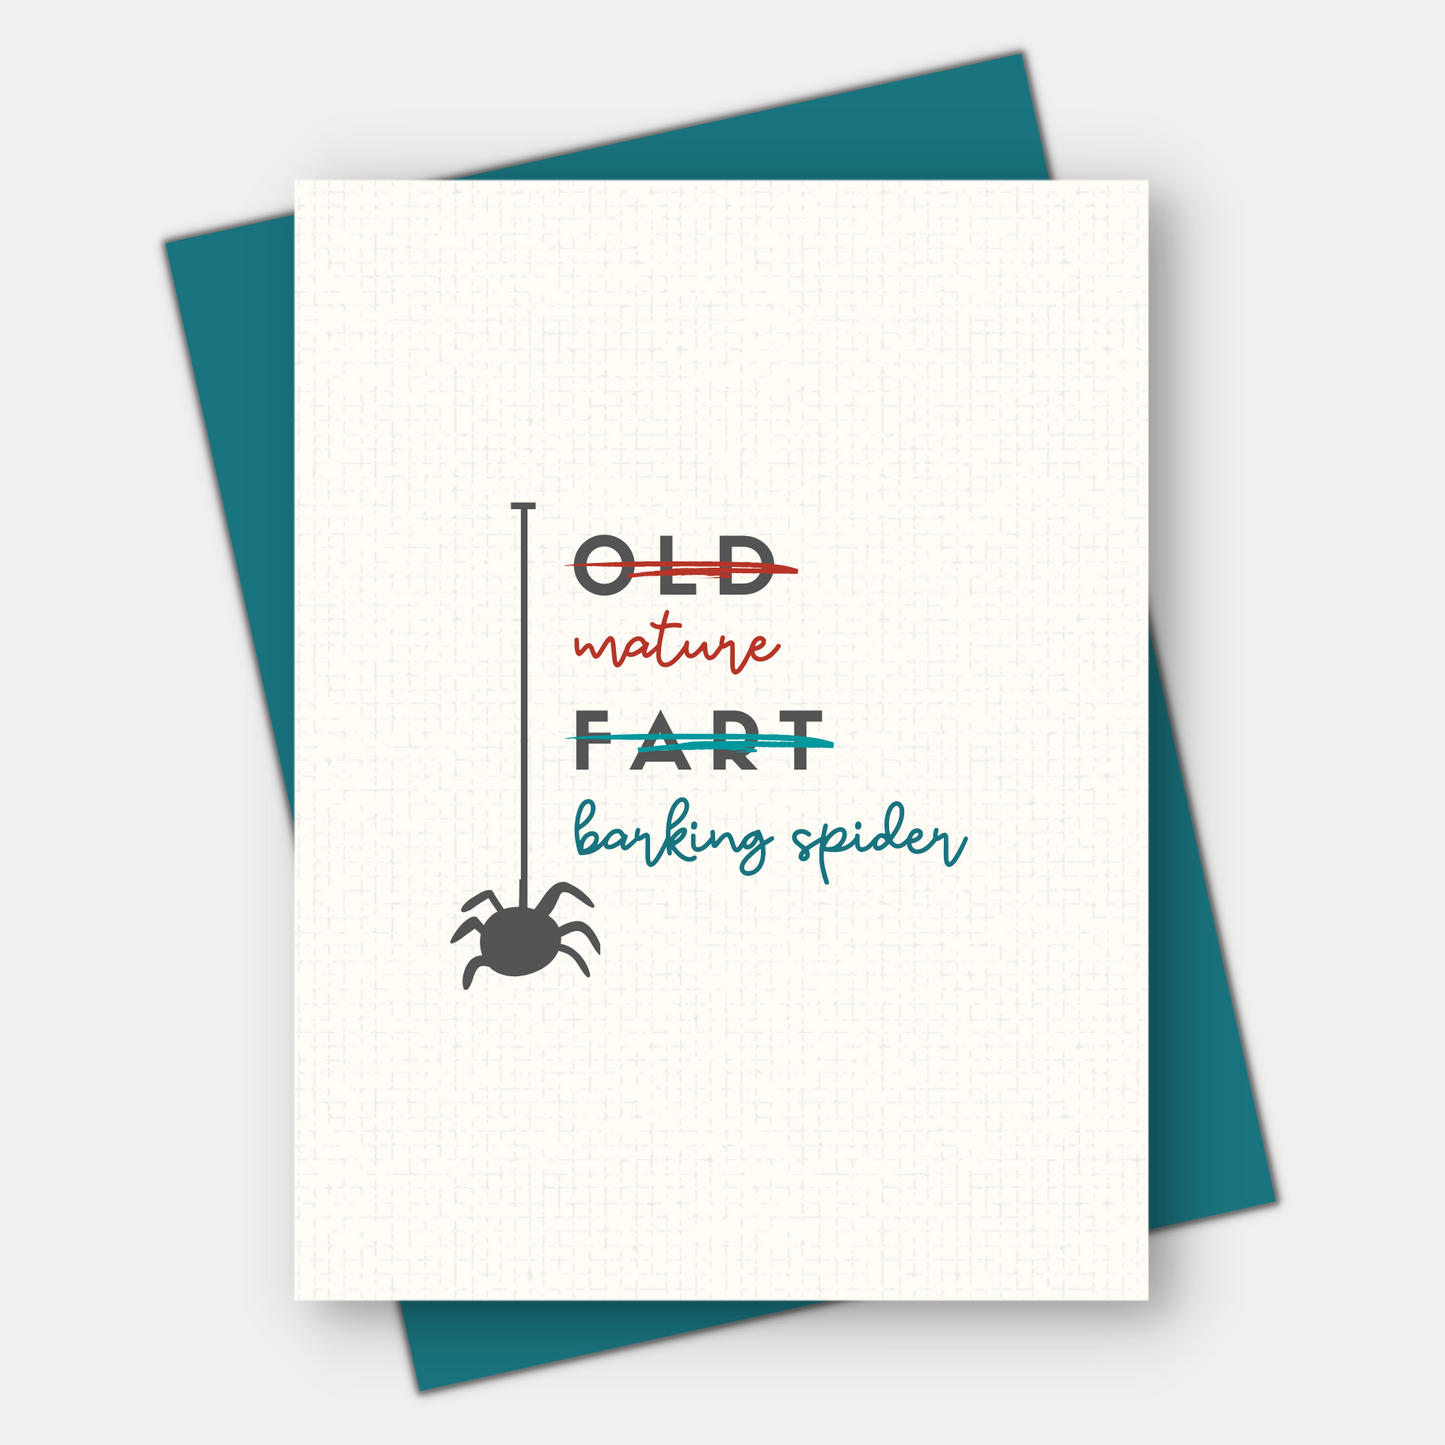 Old Fart/Mature Barking Spider, Age-Positive Birthday Card